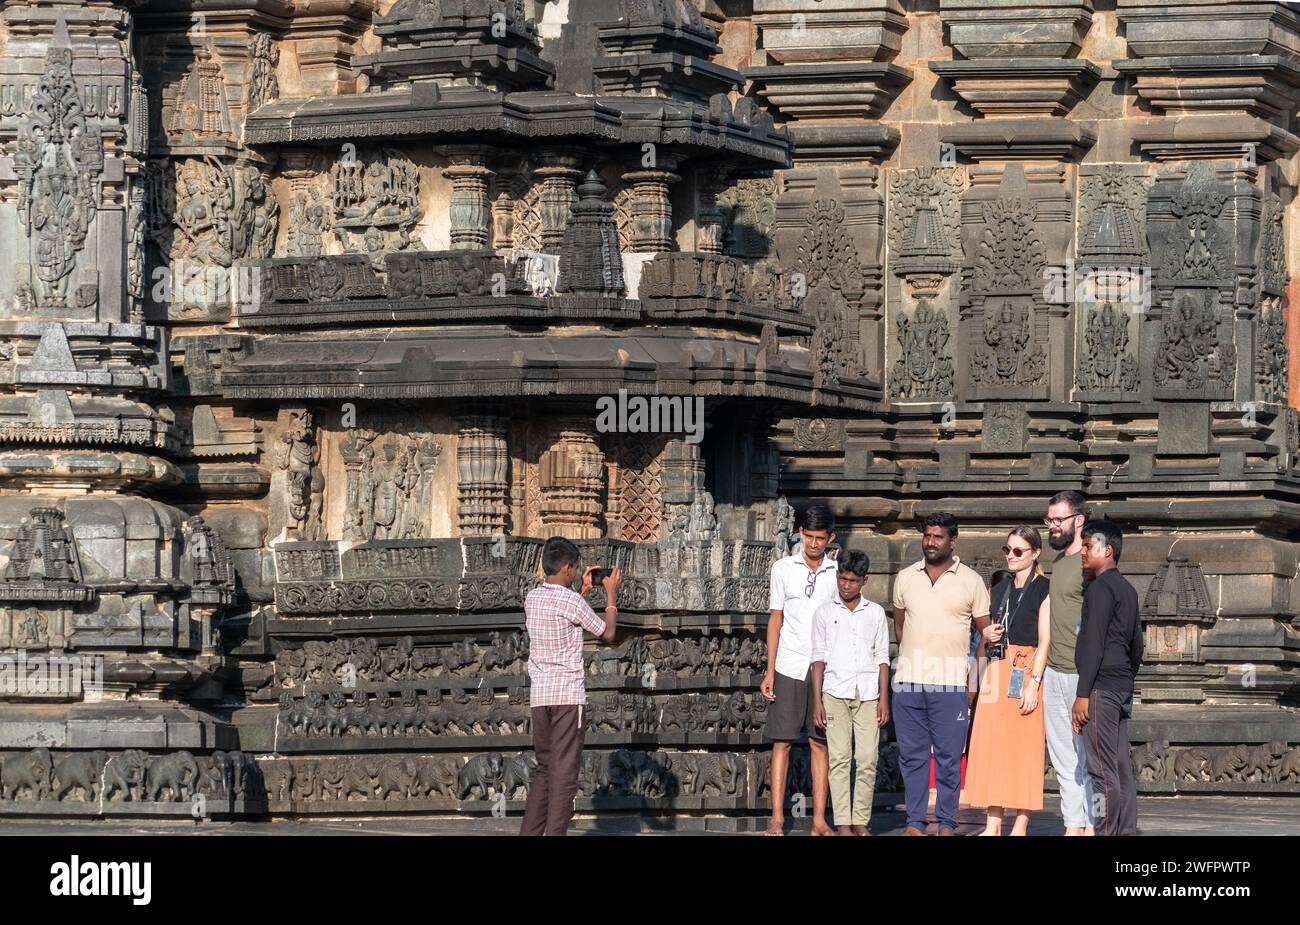 Belur, Karnataka, India - January 9 2023: A large crowd of Indian tourists at the historic Chennakeshava temple complex. Stock Photo